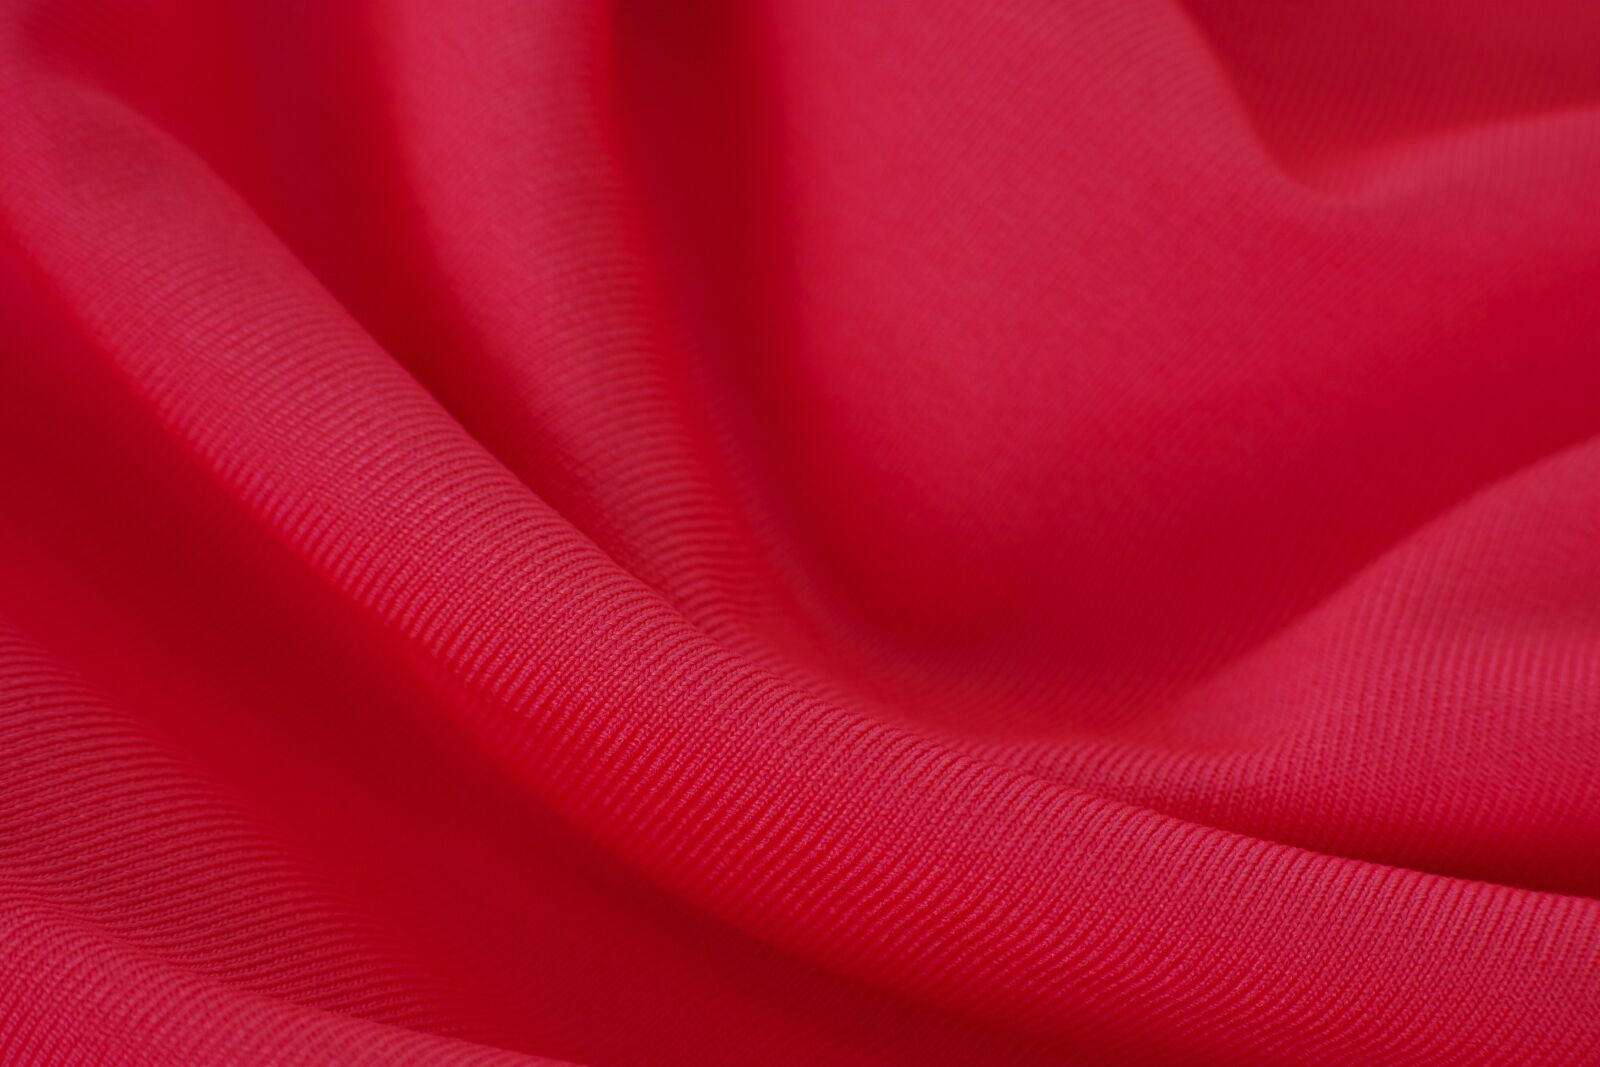 Sigma dp3 Quattro sample photo. Red, colors, fabric photography